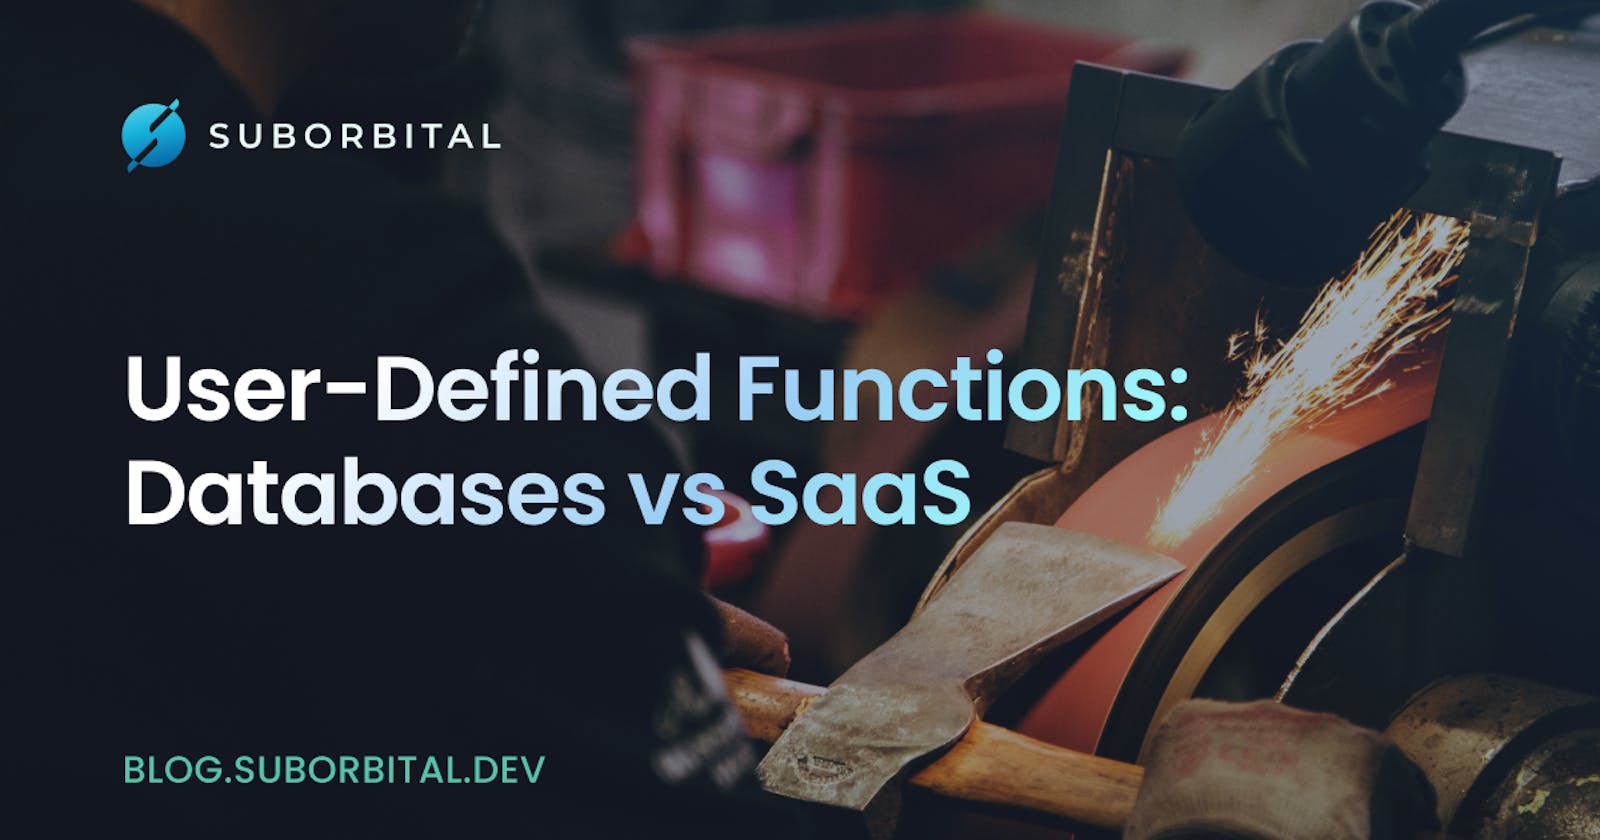 User-Defined Functions in Databases vs SaaS - what's the difference?